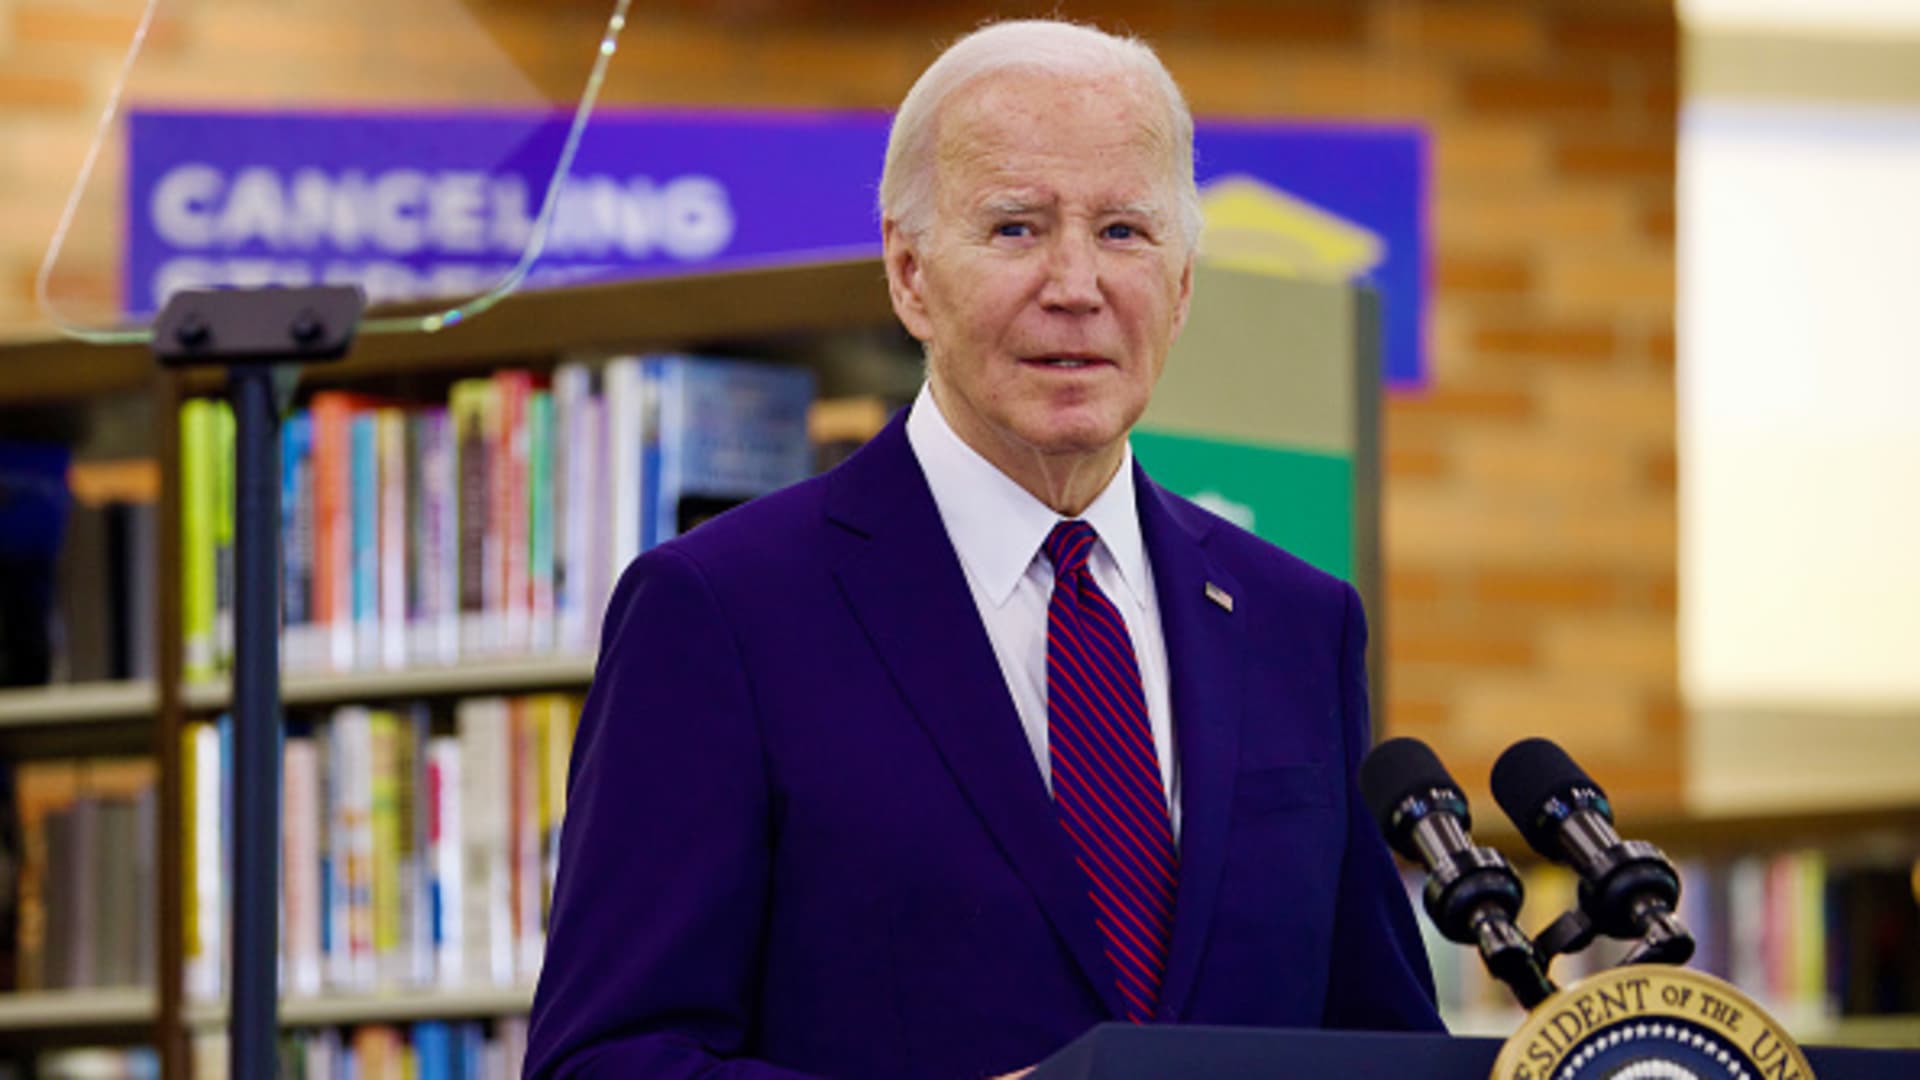 Biden announces new student loan forgiveness plan affecting tens of millions of Americans